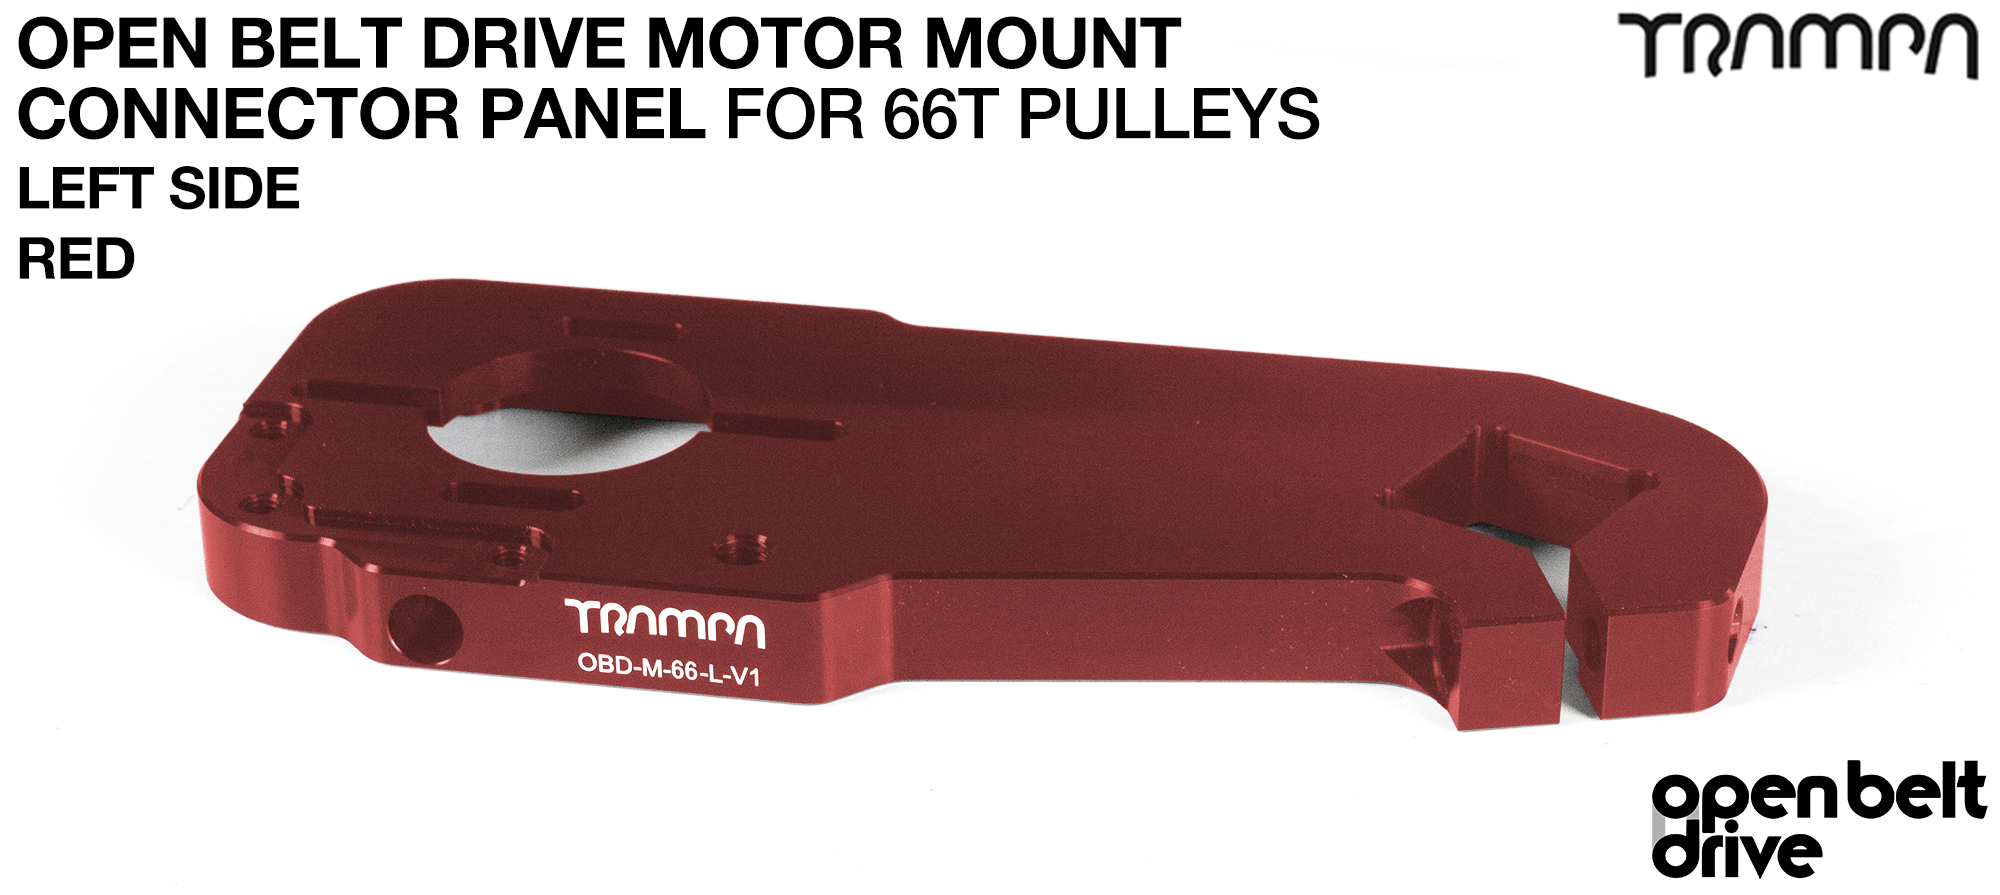 OBD Motor Mount Connector Panel for 66 tooth Pulleys - REGULAR - RED